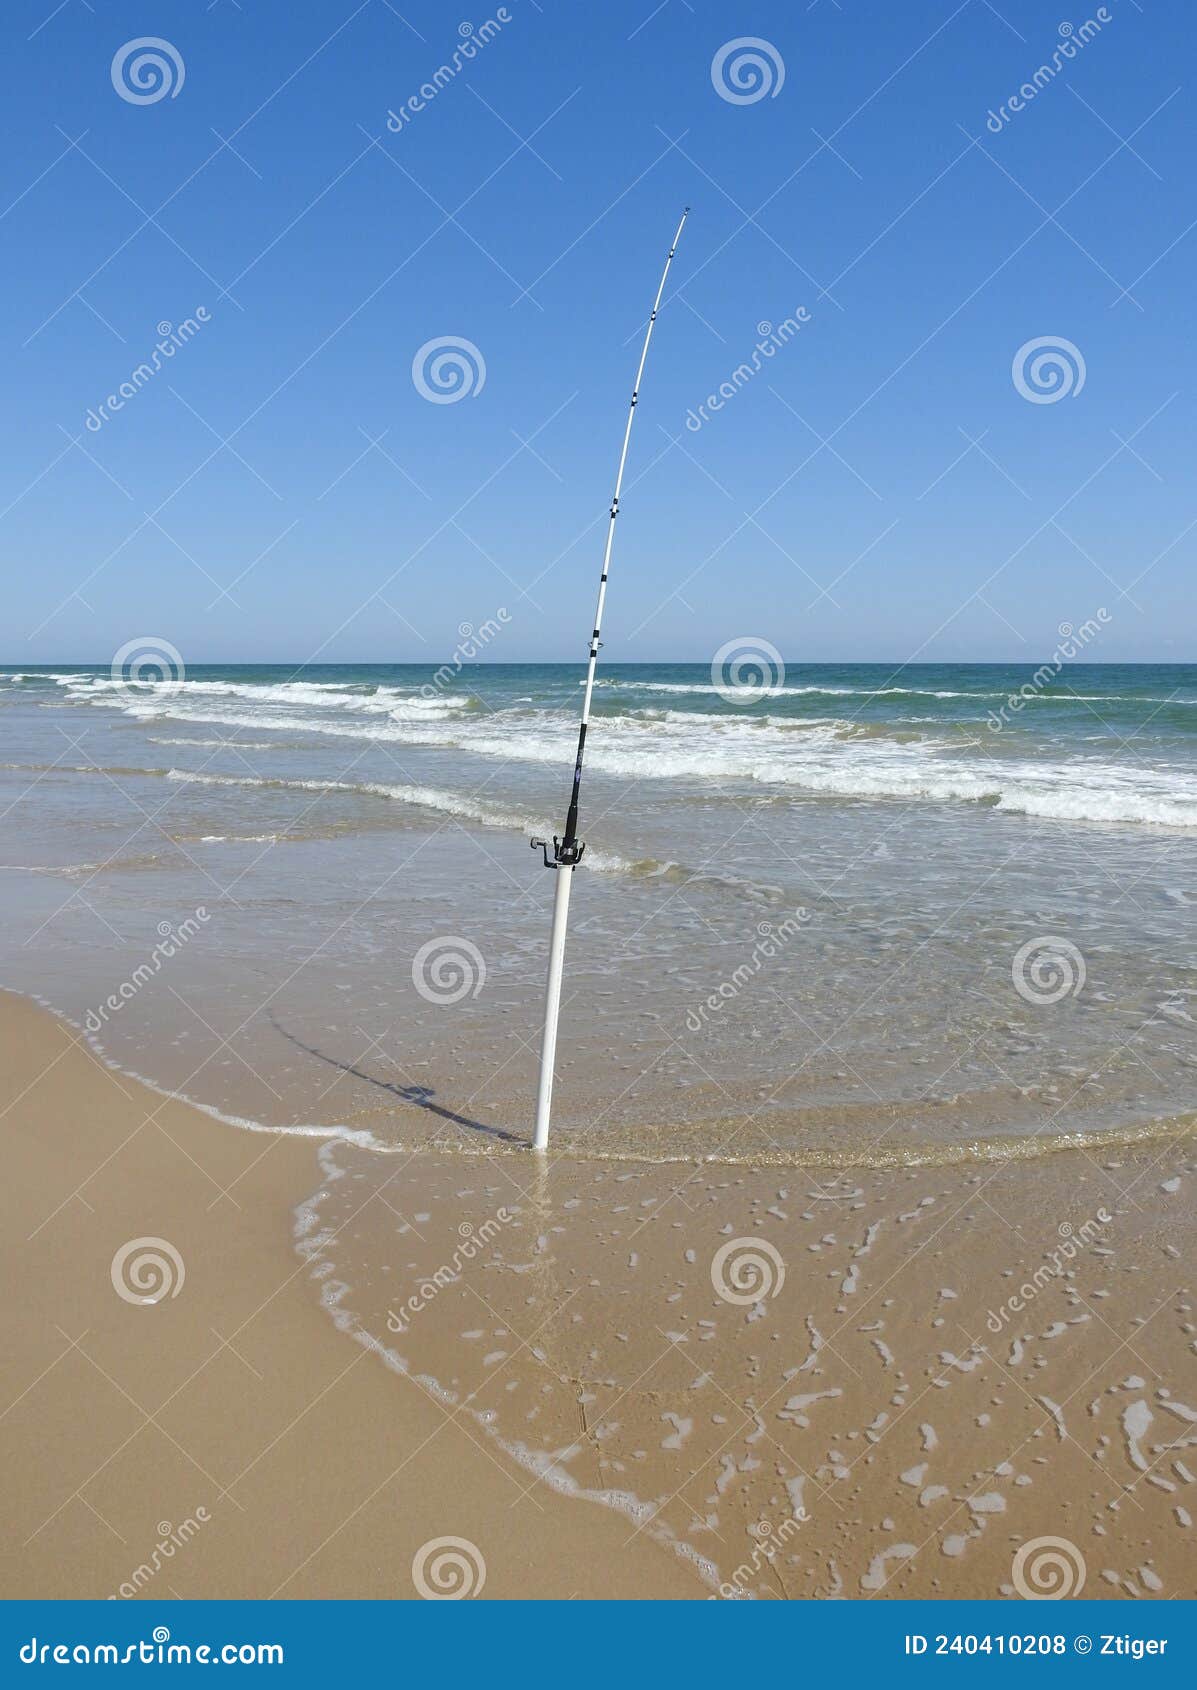 Fishing Pole on the Beach stock photo. Image of ocean - 240410208